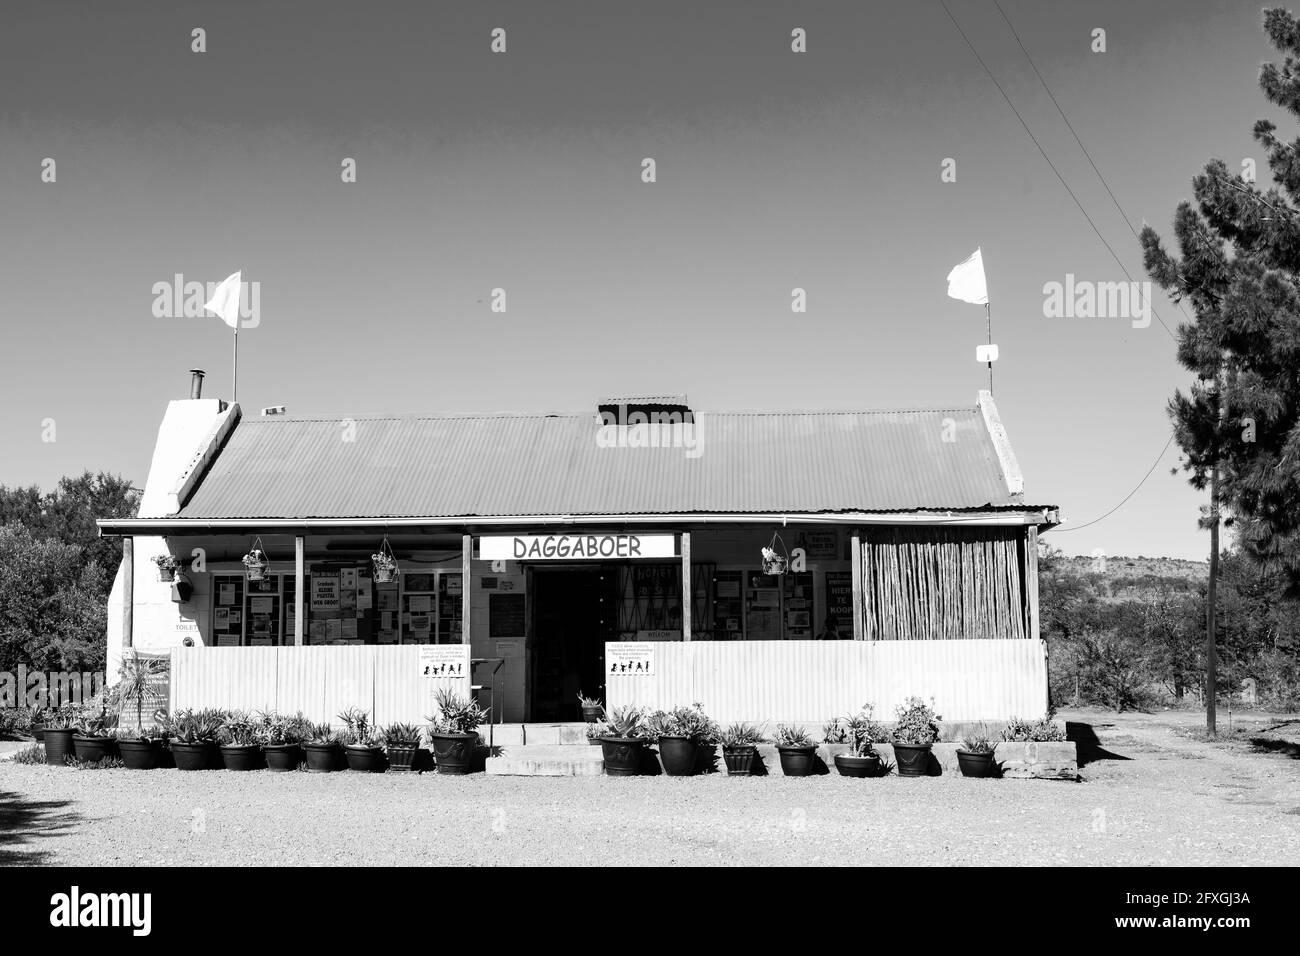 KAROO, SOUTH AFRICA - Jan 06, 2021: Karoo, South Africa - March 17 2019: Daggaboer Farmstall on the side of a busy interstate highway in rural South A Stock Photo